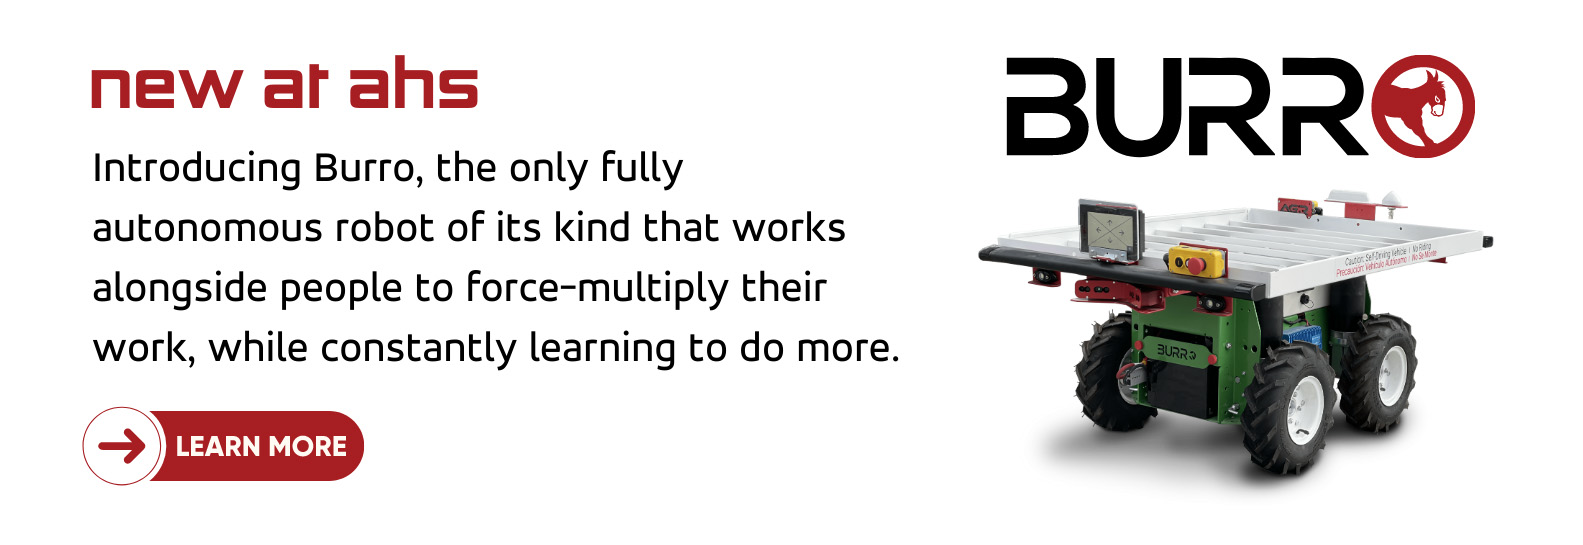 Introducing Burro, the only fully autonomous robot of its kind that works alongside people to force-multiply their work, while constantly learning to do more.